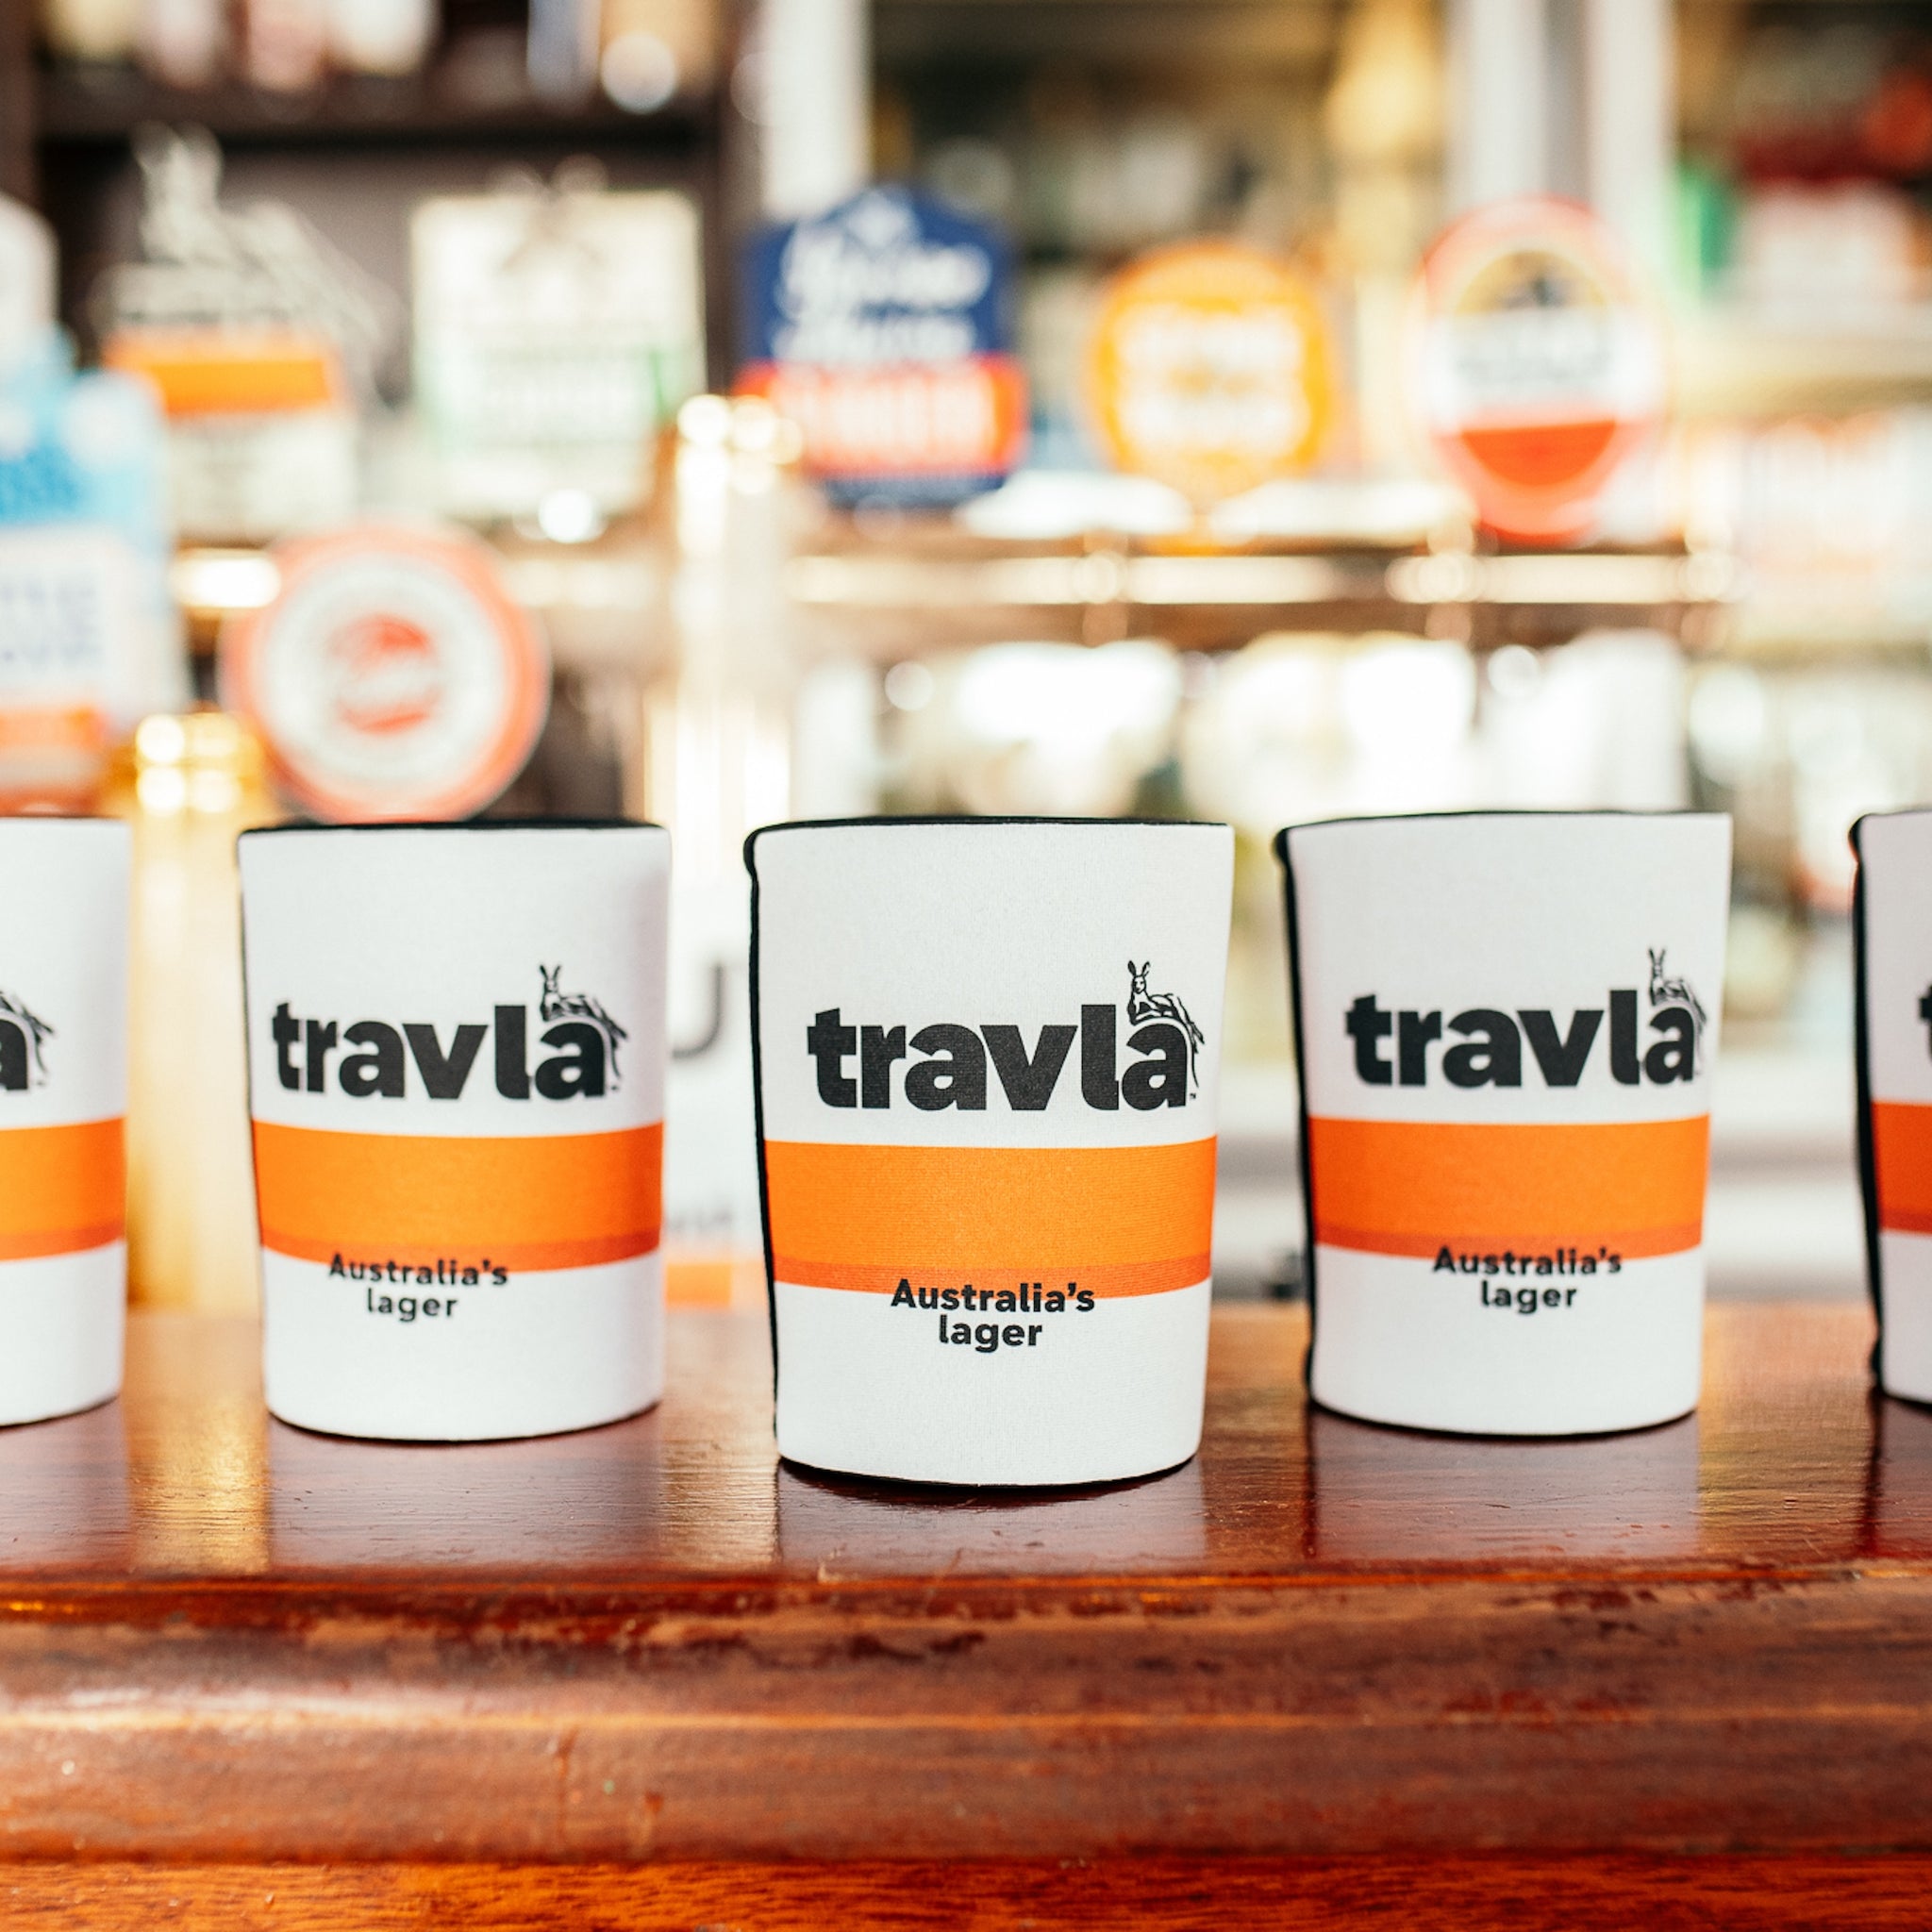 travla stubby holders lined up on a bar